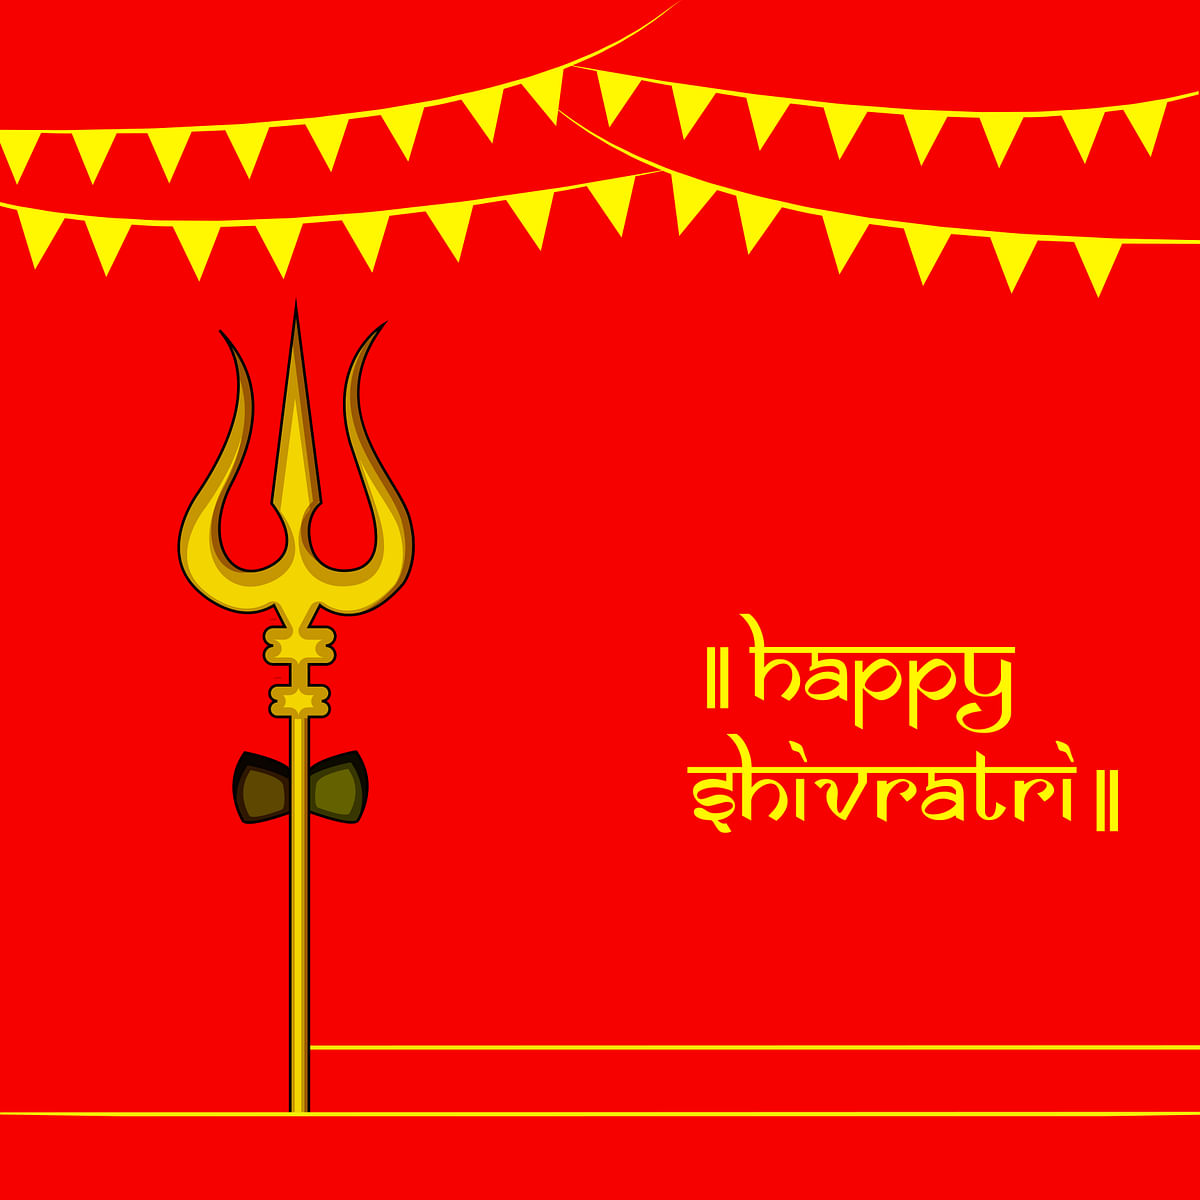 Here are some images, quotes and messages  to send your friends, relatives and peers on this auspicious occasion.